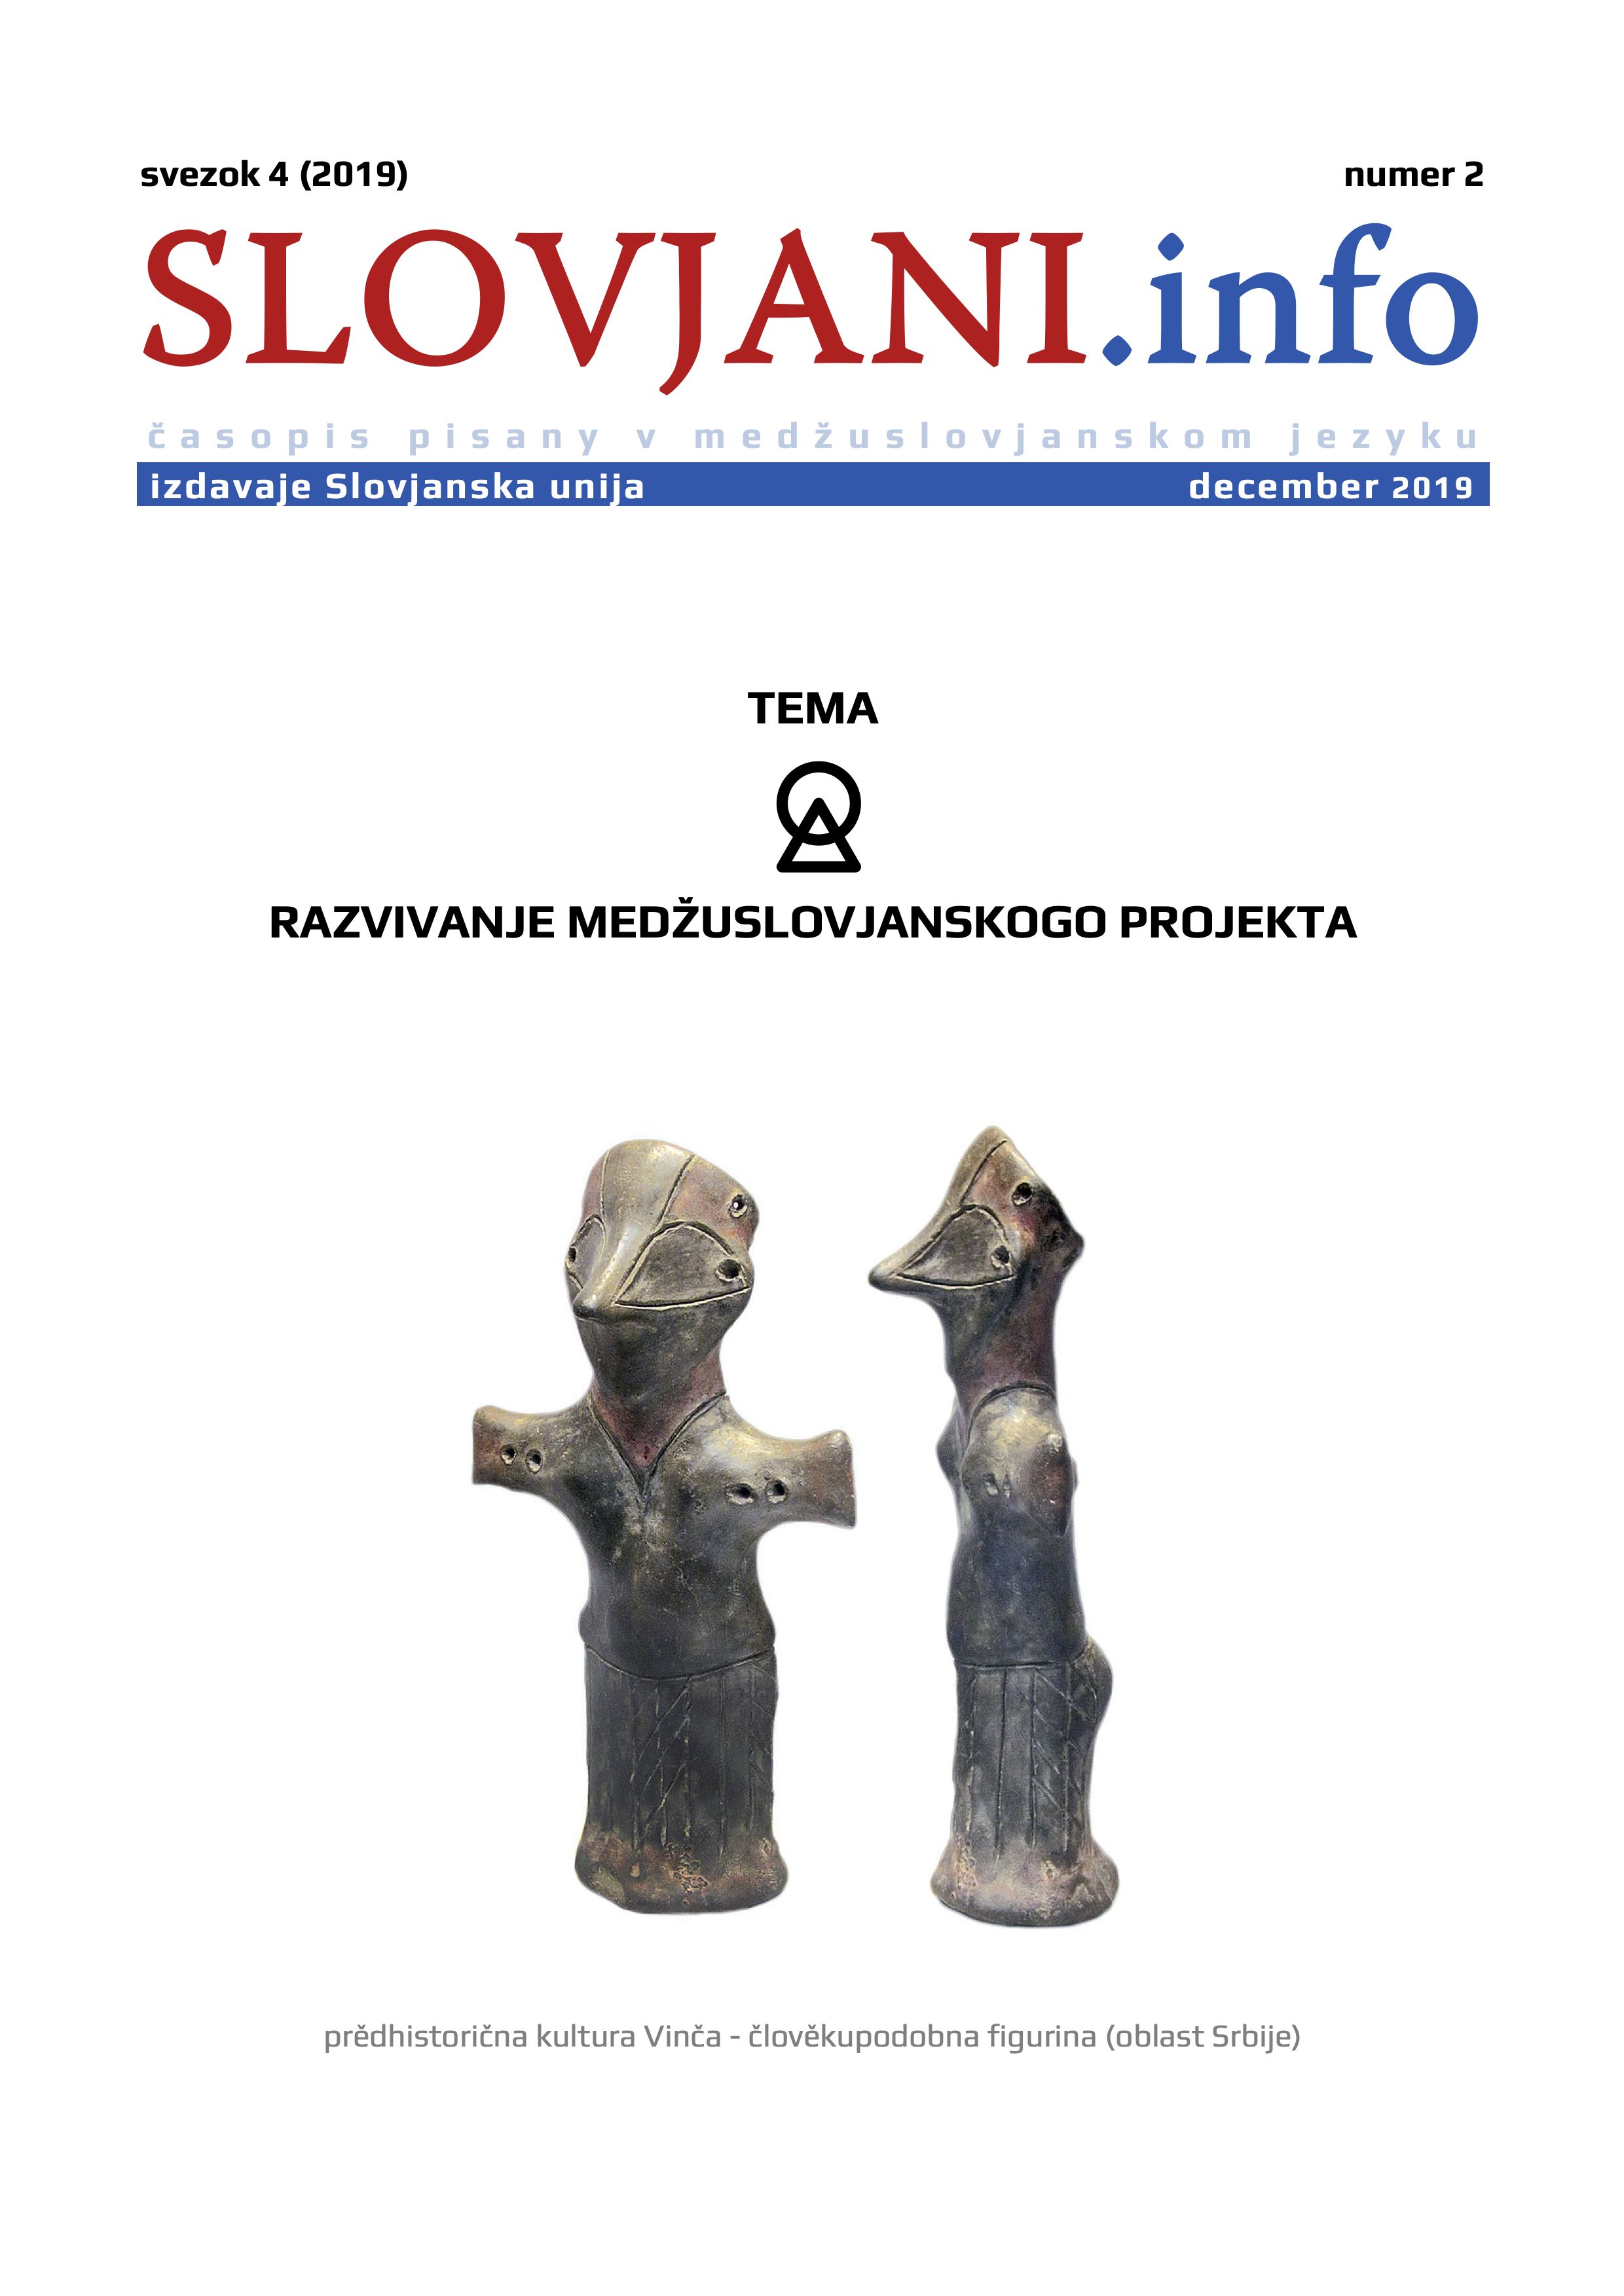 Russia and Czechia - meetings of literature and cultures at the Institute of Slavic Studies of the Russian Academy of Sciences Cover Image